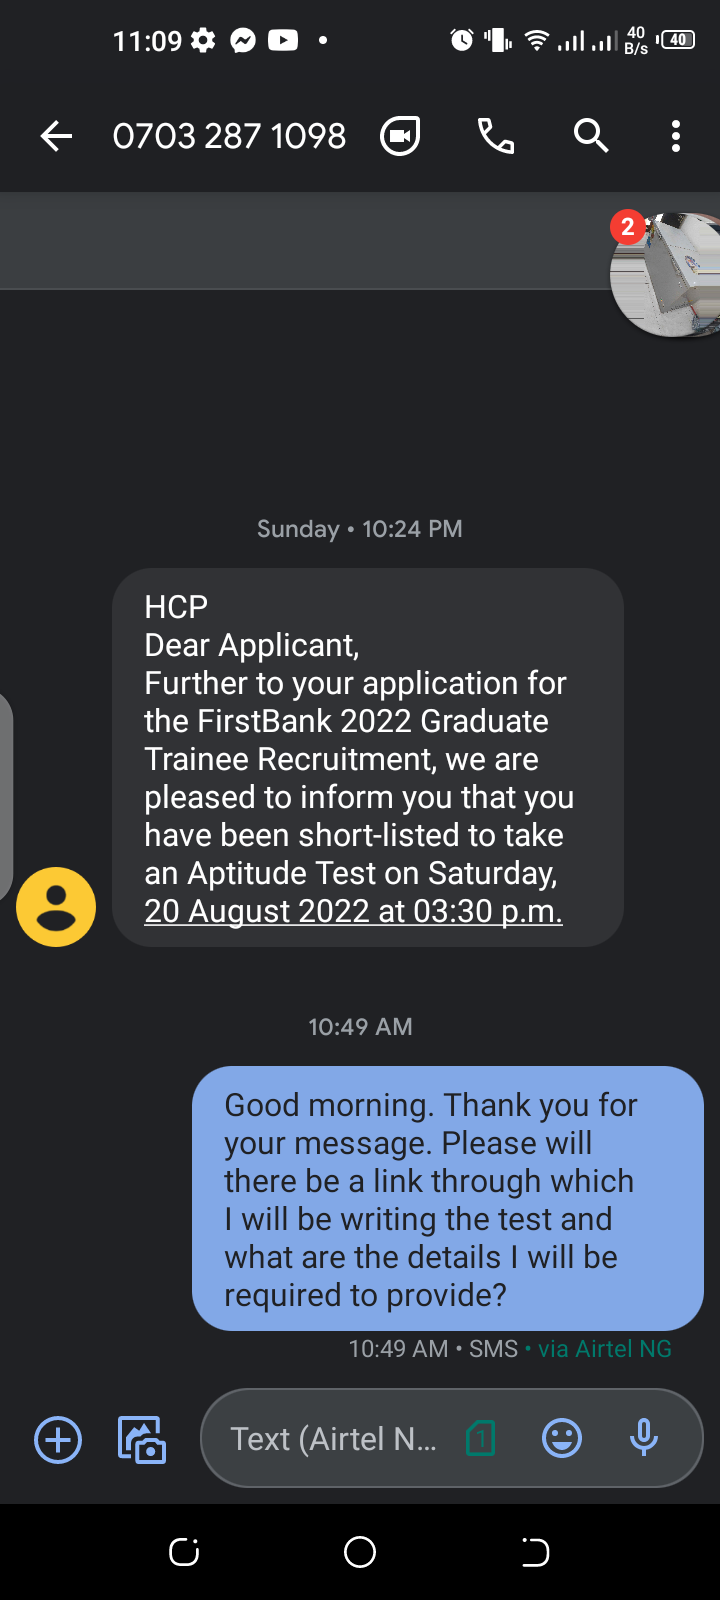 army-aptitude-tests-platinum-pack-download-how-2-become